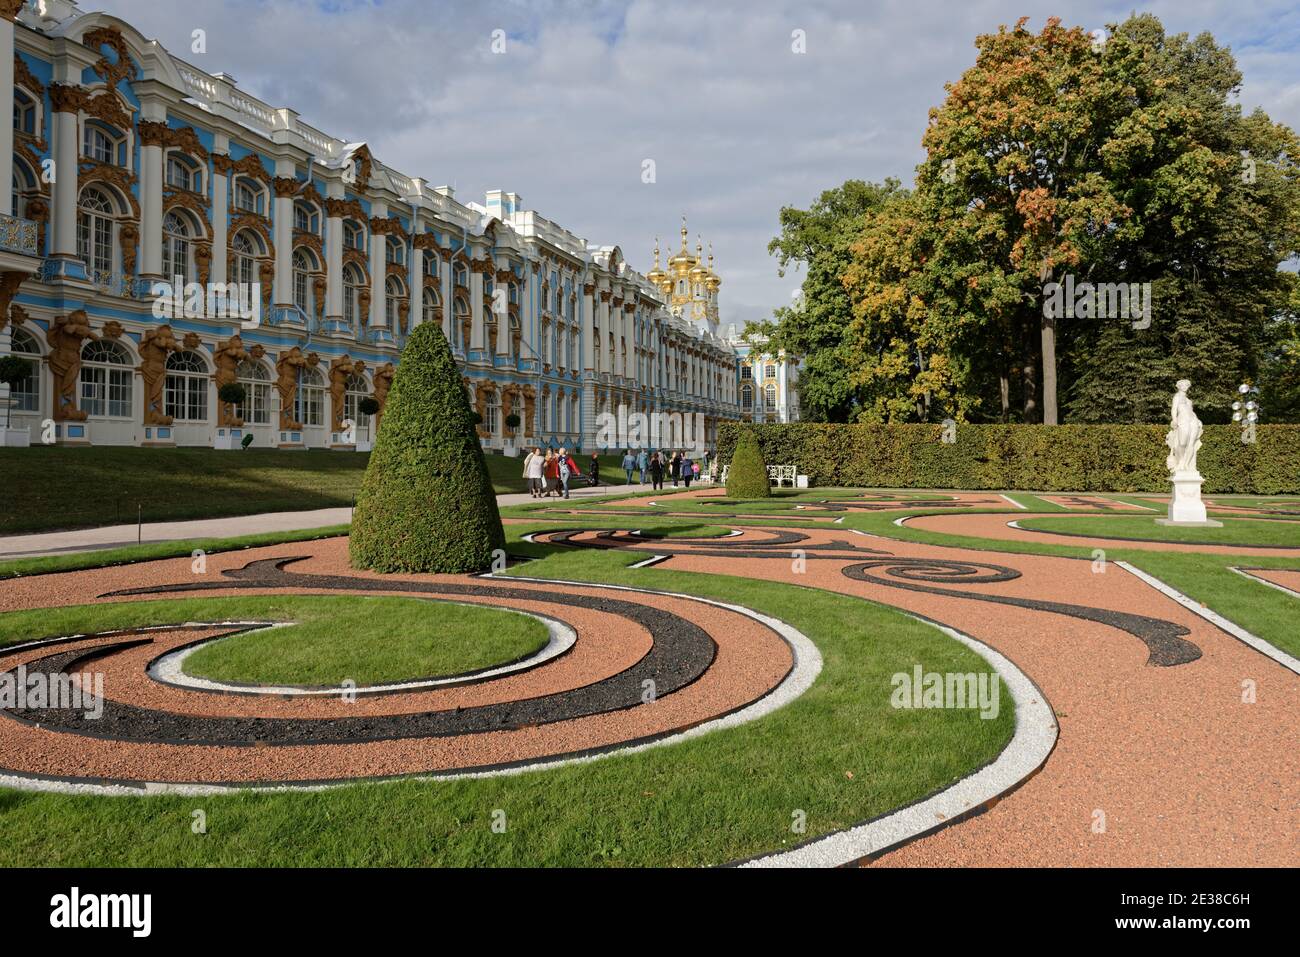 People walking in front of the Catherine Palace in Catherine park, Tsarskoe Selo, Pushkin town near St. Petersburg, Russia Stock Photo